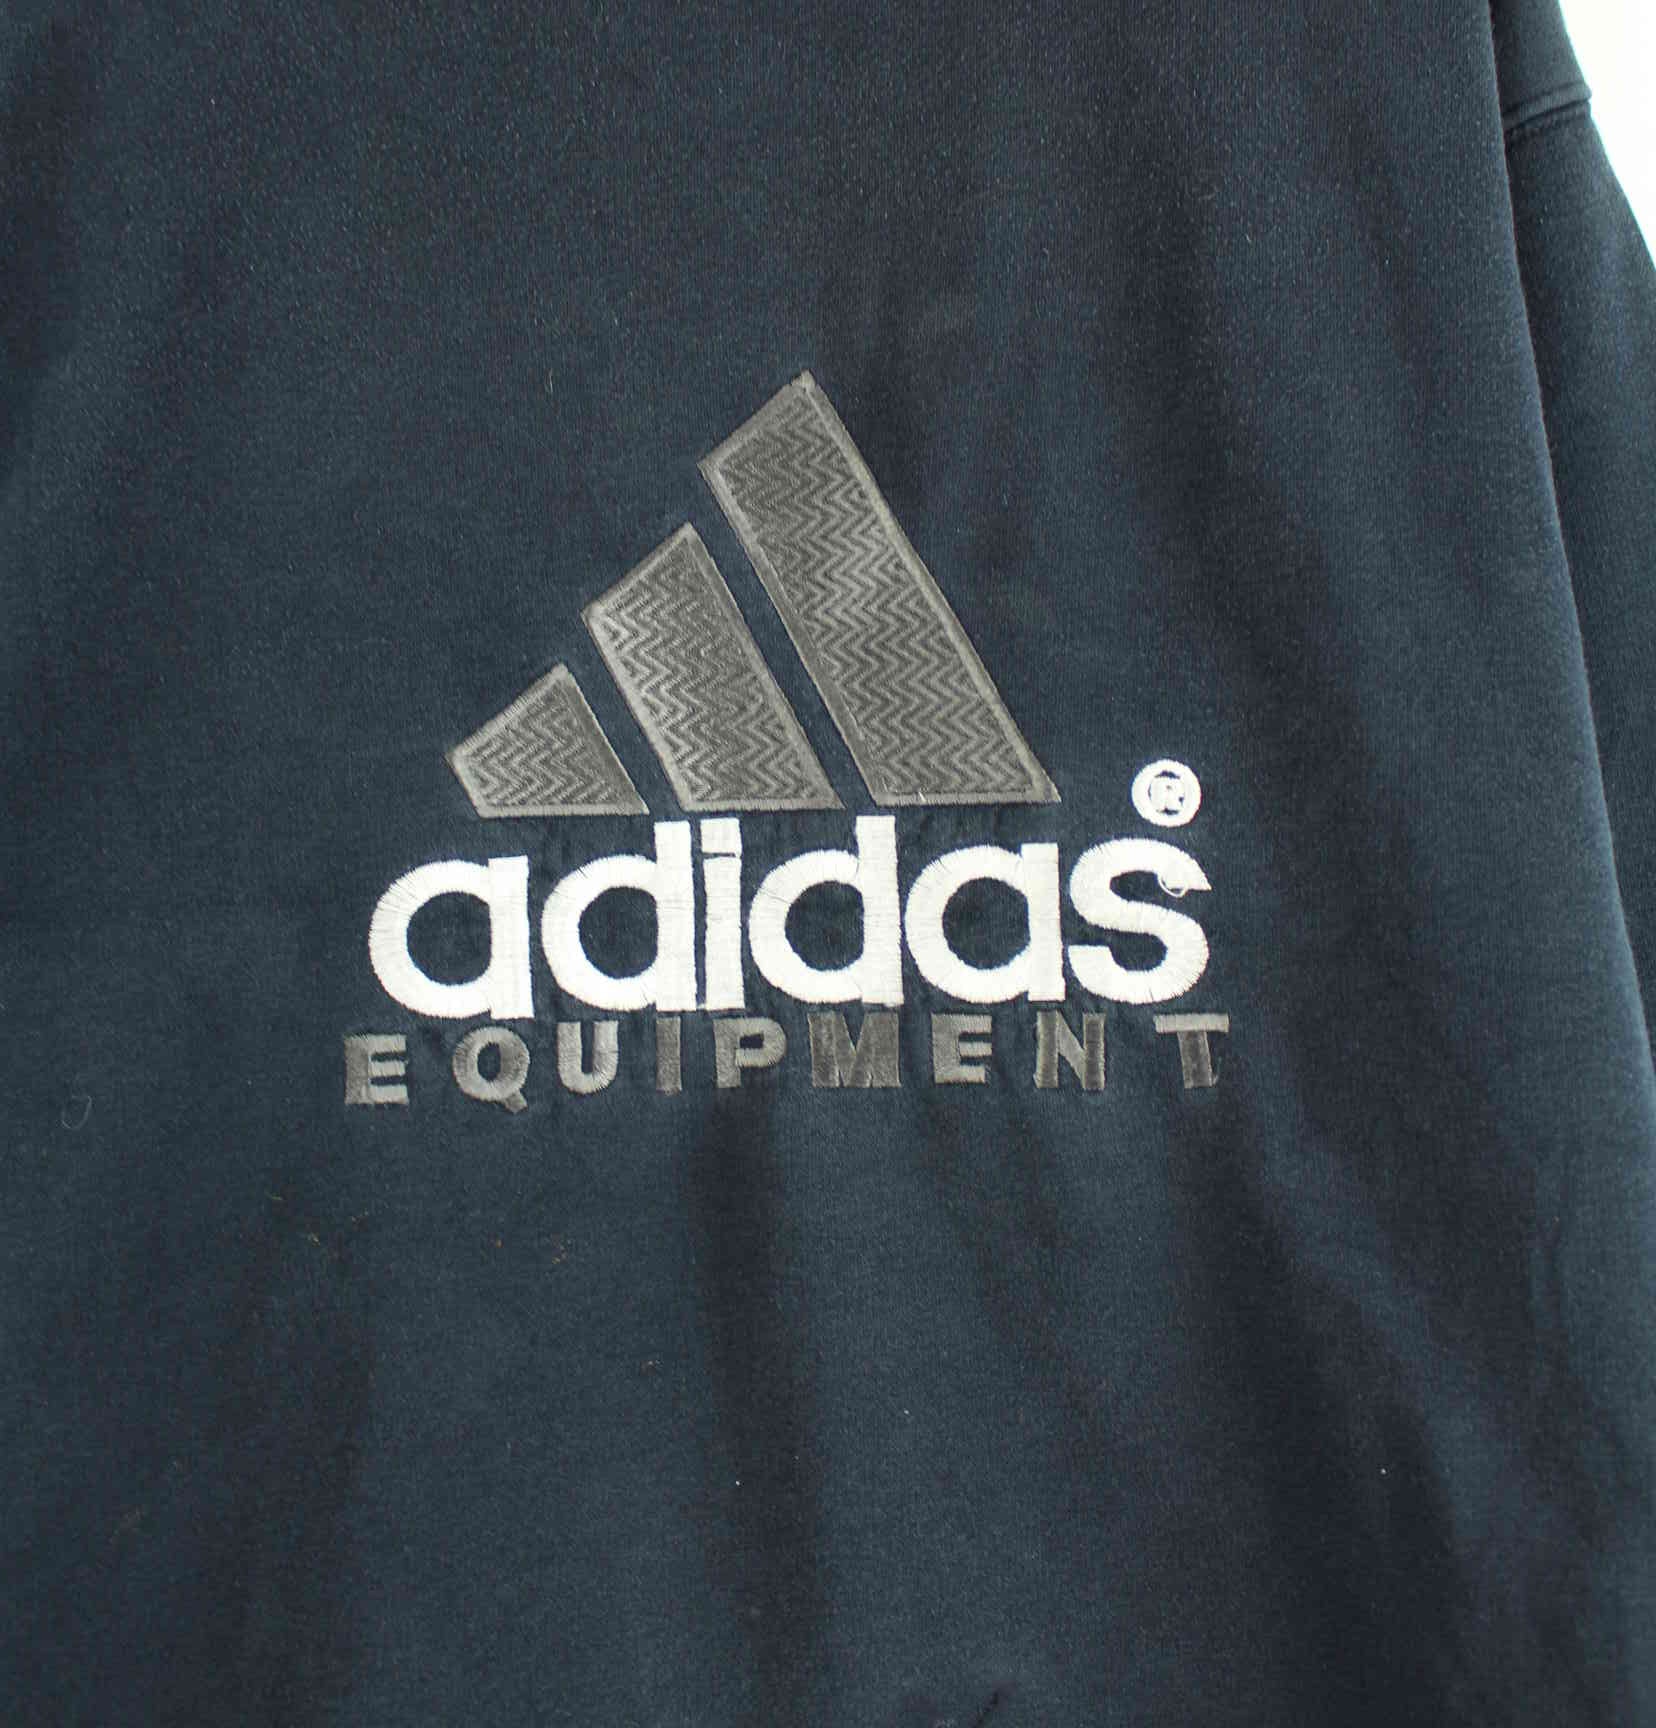 Adidas Equipment 90s Vintage Embroidered Sweater Blau S (detail image 1)